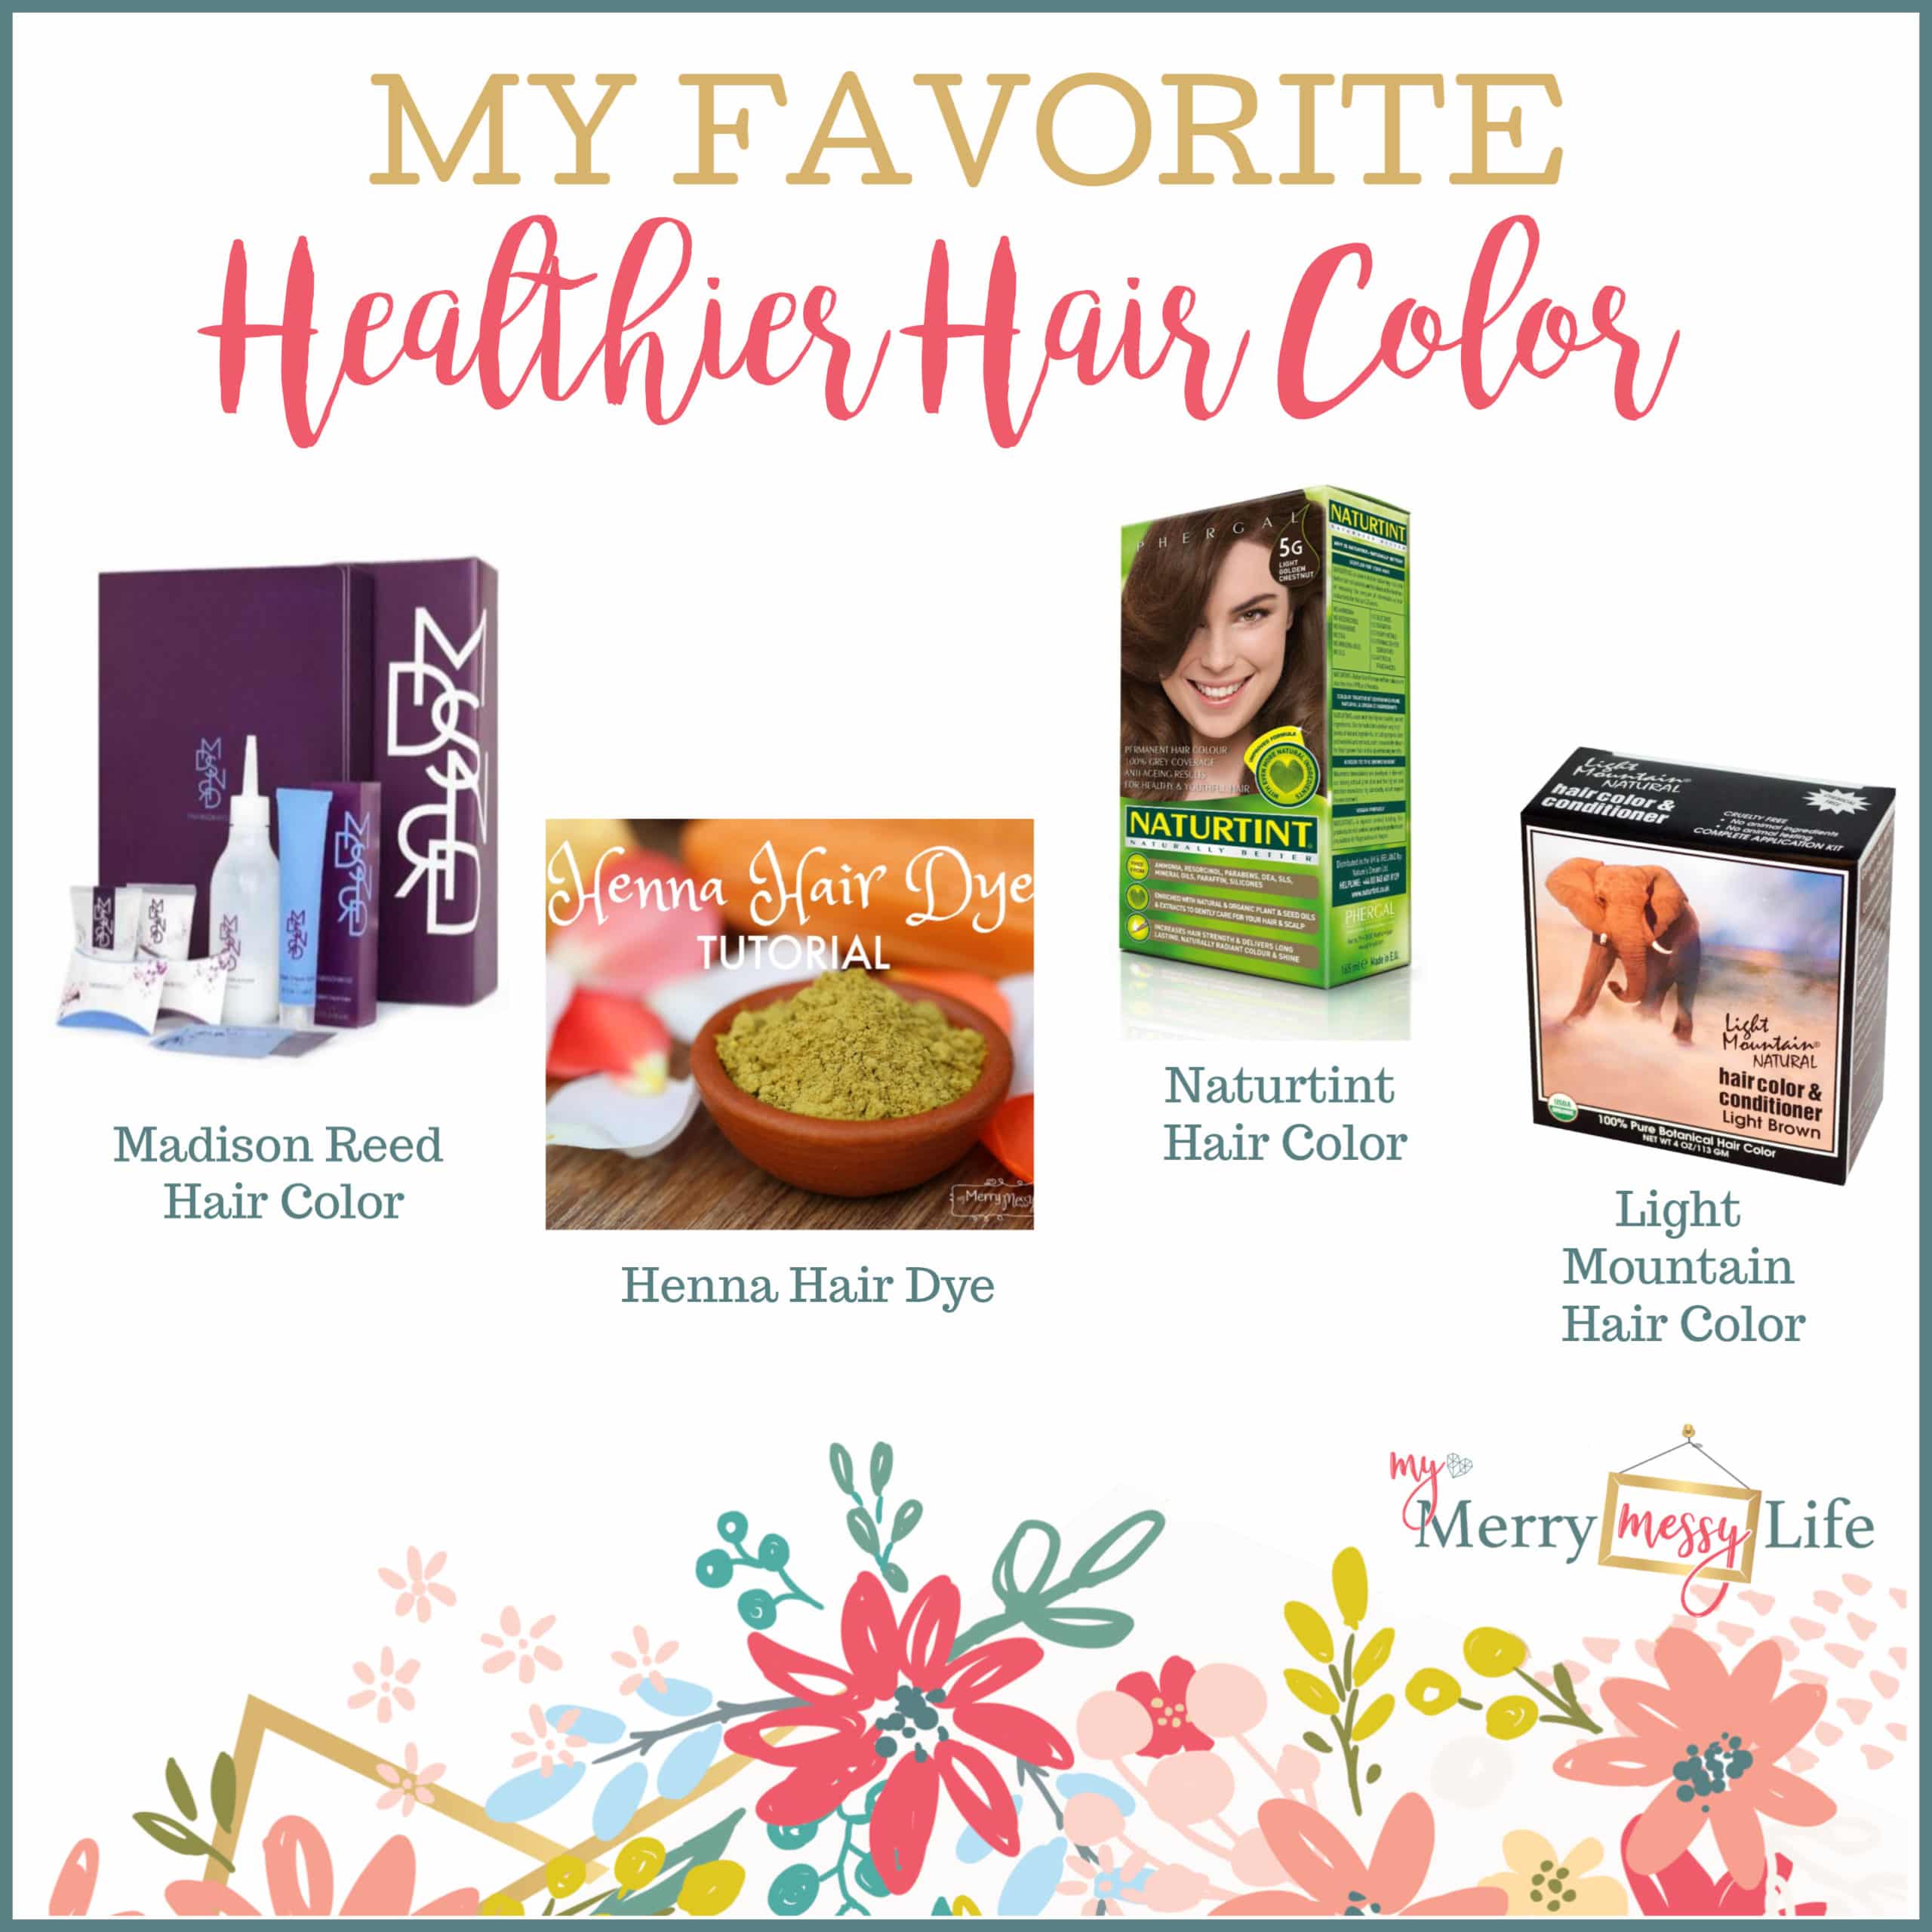 Healthier Hair Color that won't irritate your scalp! Madison Reed, Naturtint, Light Mountain and Henna